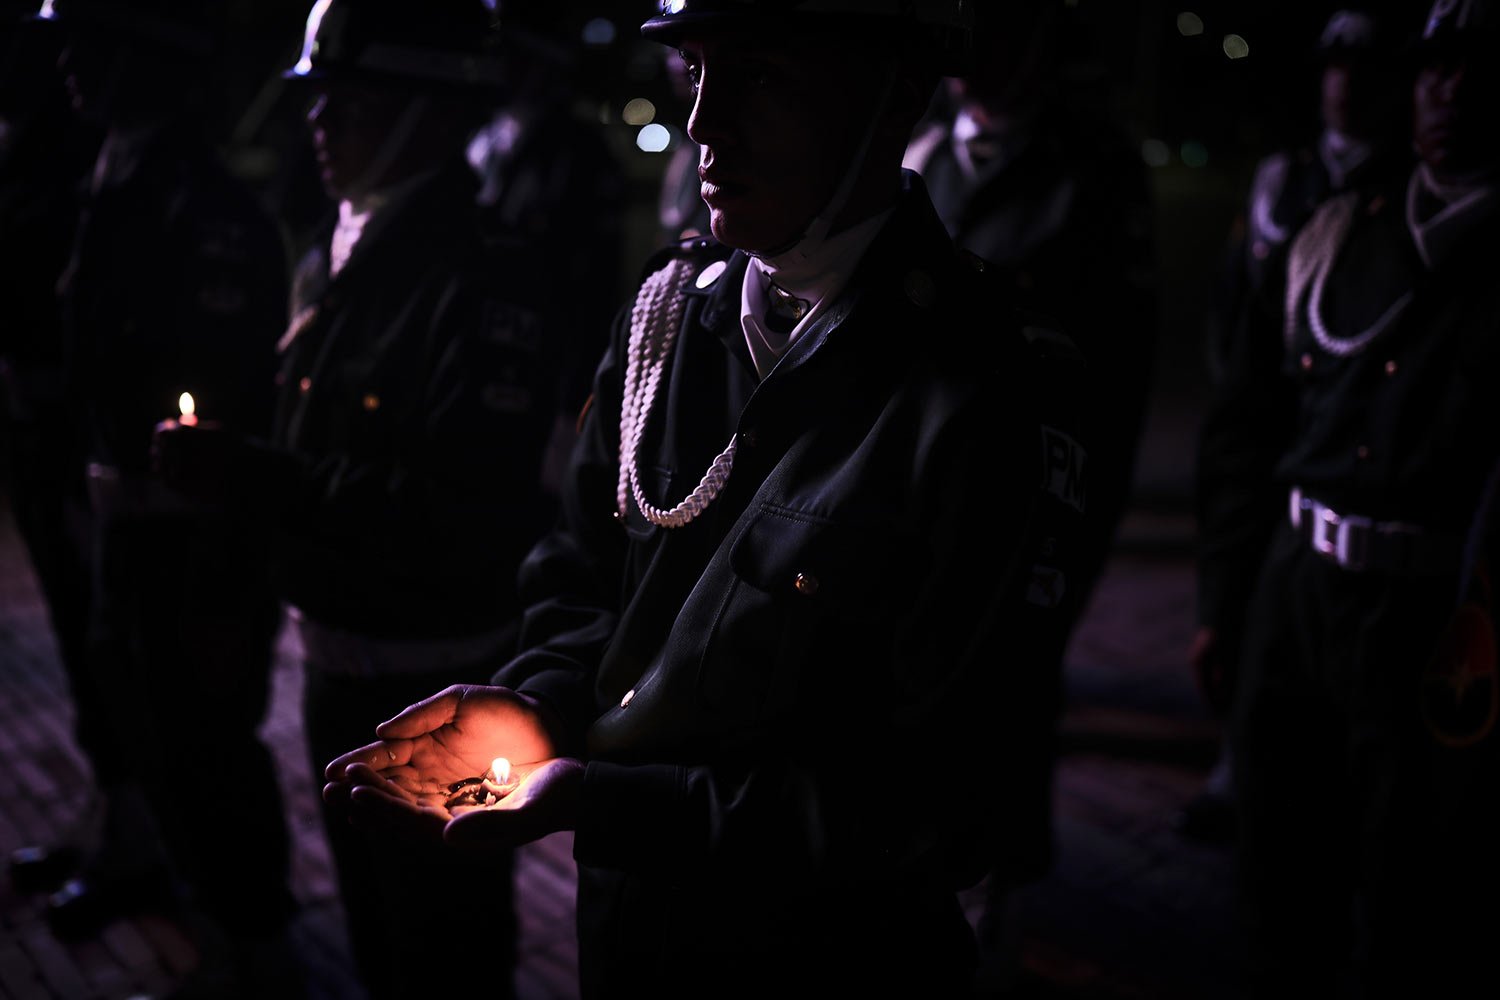  A soldier holds a candle during a vigil for fellow soldiers who were killed in a FARC dissident attack earlier in the week, at the Fallen Soldiers Monument, in Bogota, Colombia, Friday, Dec. 9, 2022.  (AP Photo/Ivan Valencia) 